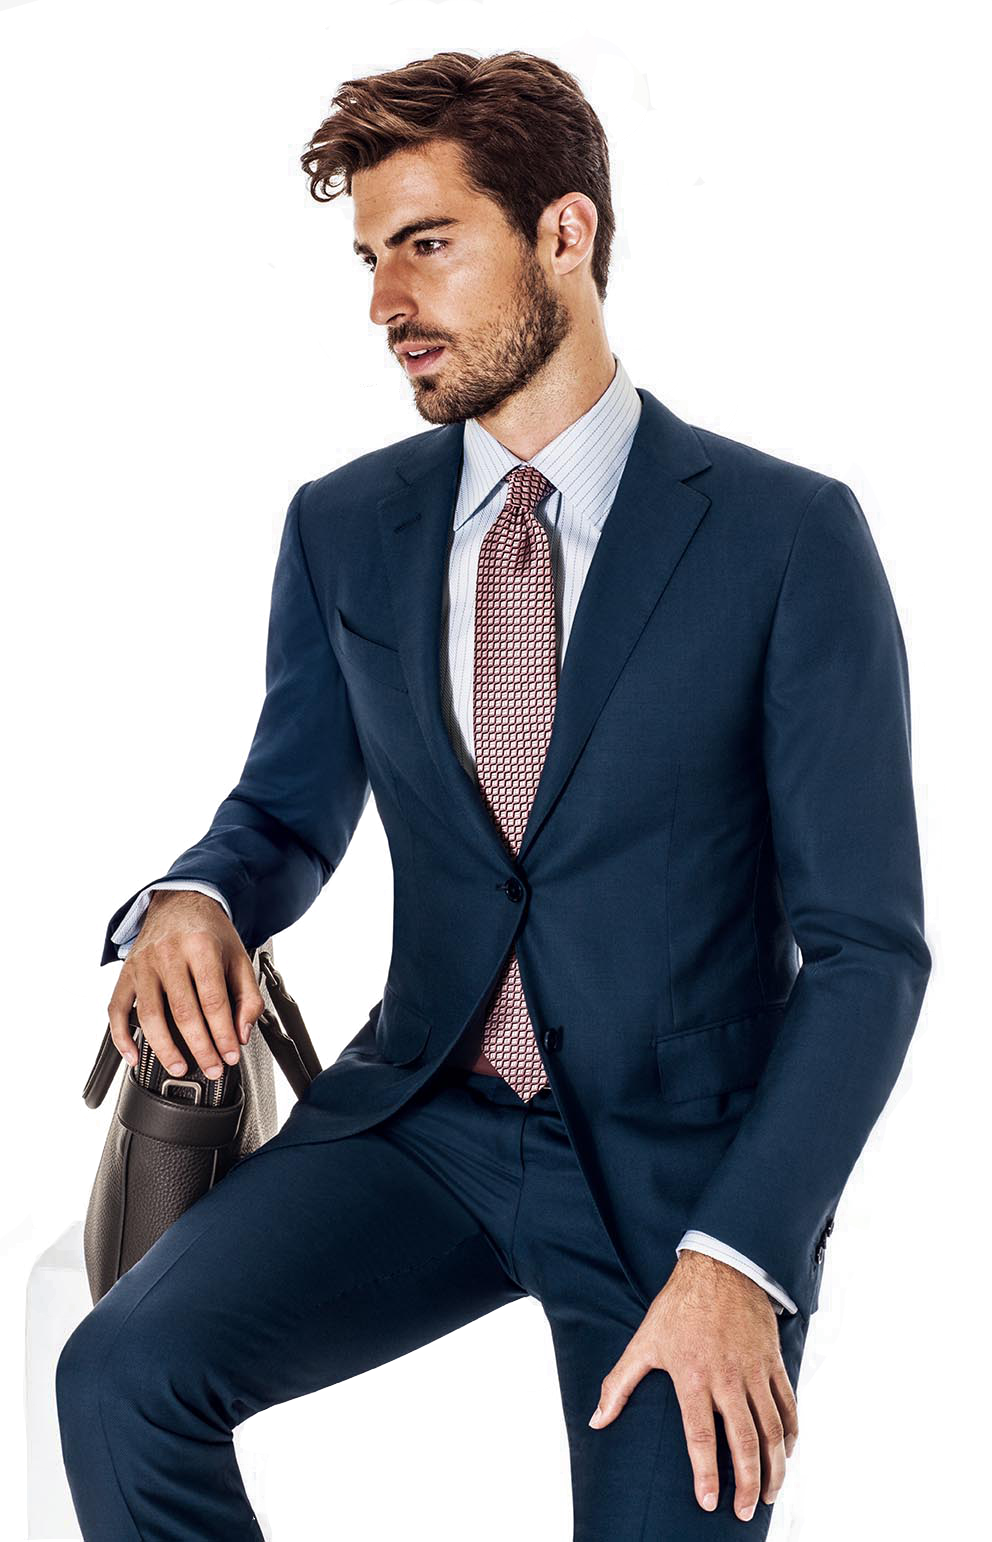 Man In Suit PNG Background Image